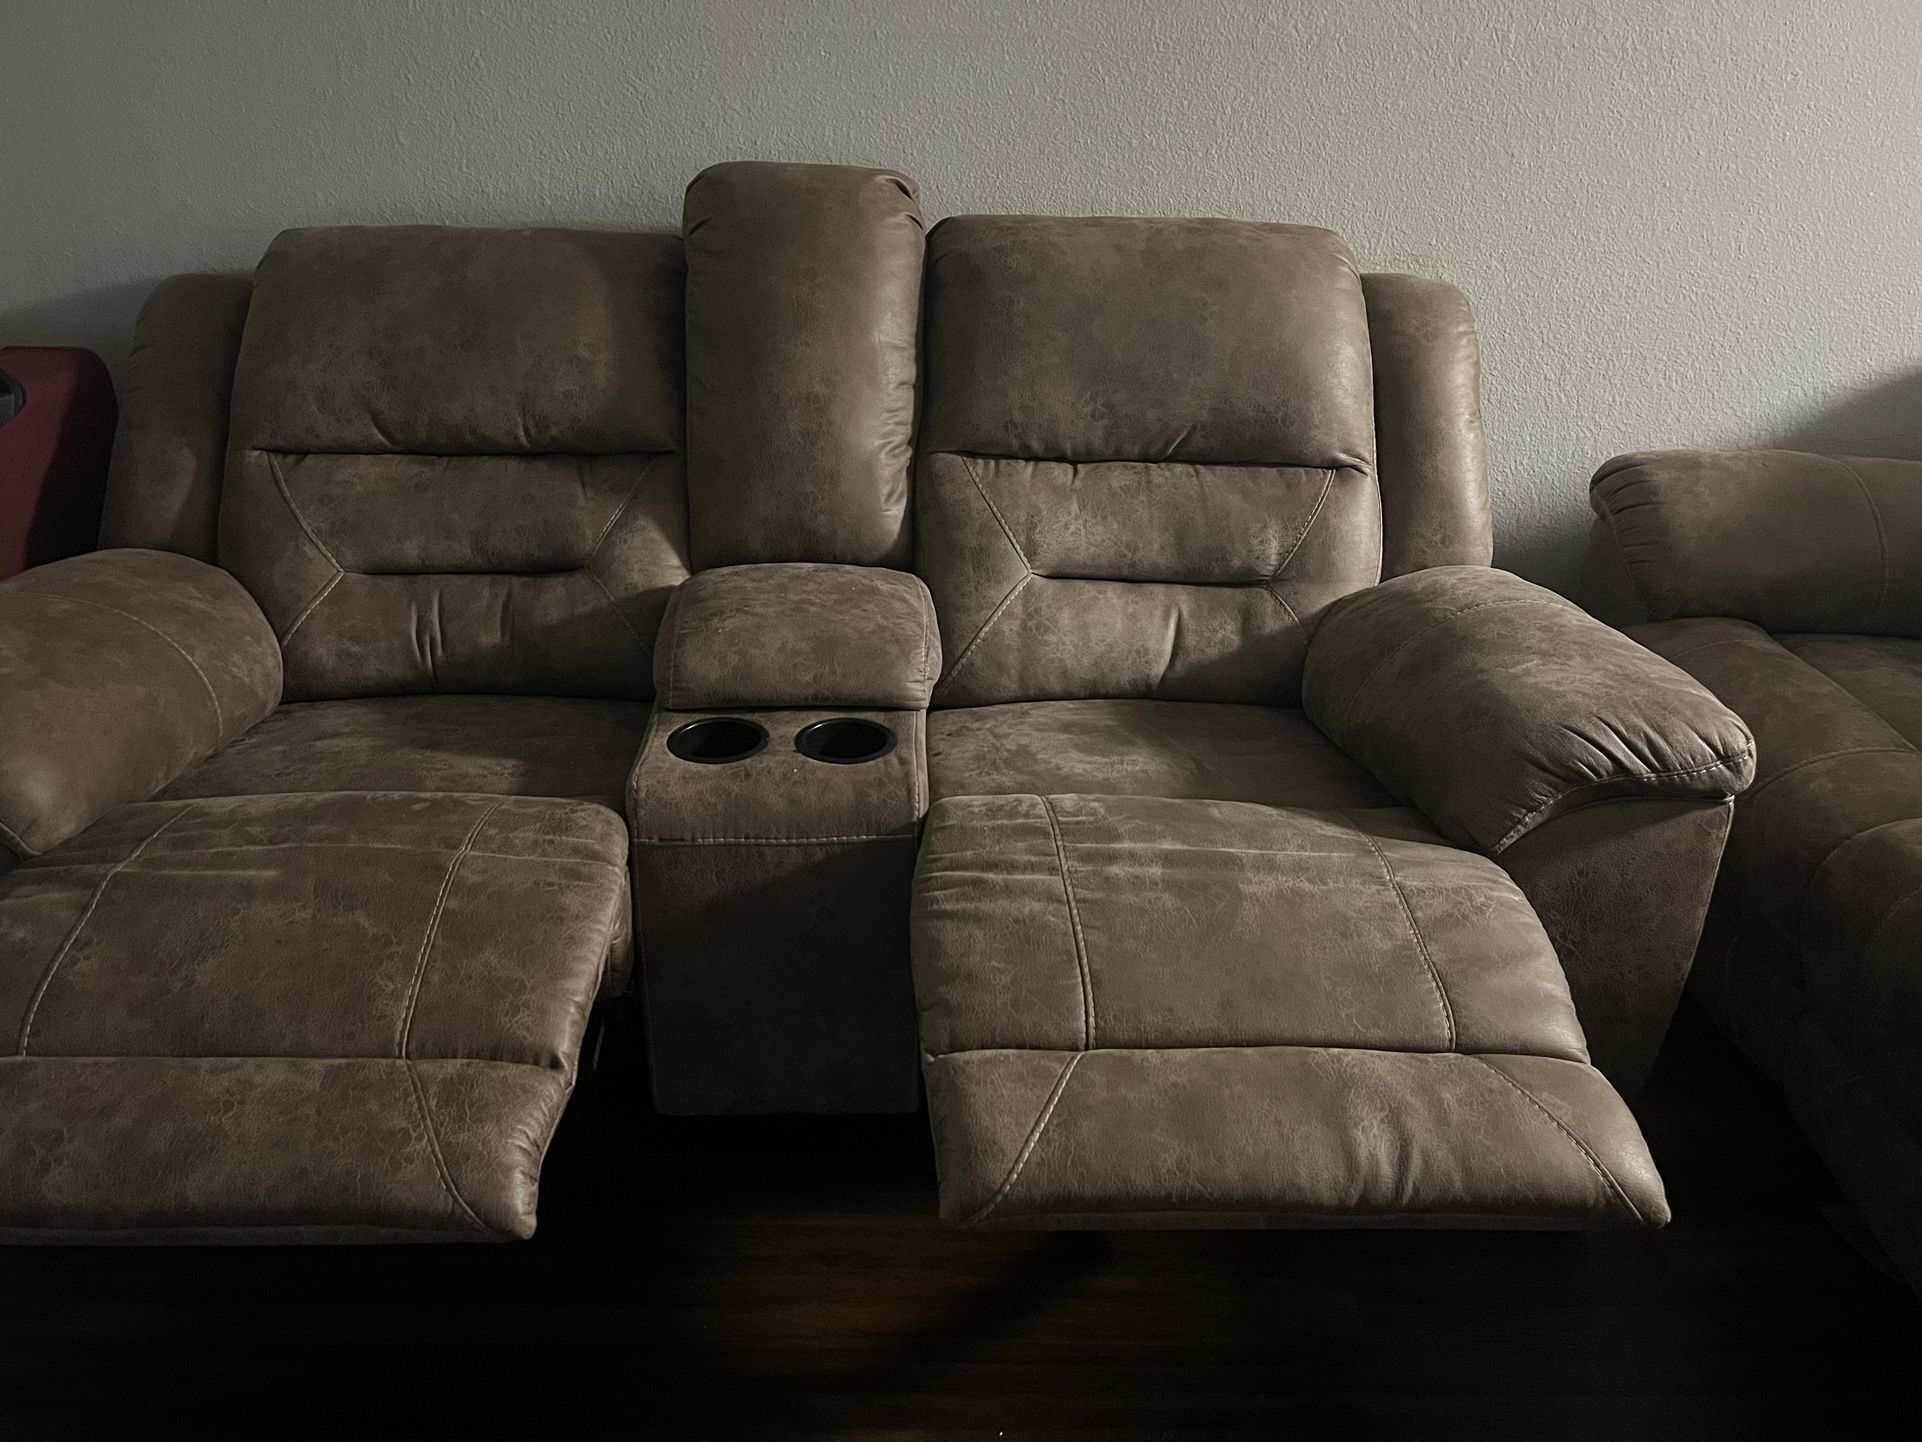 Recliner Couch For Sale 